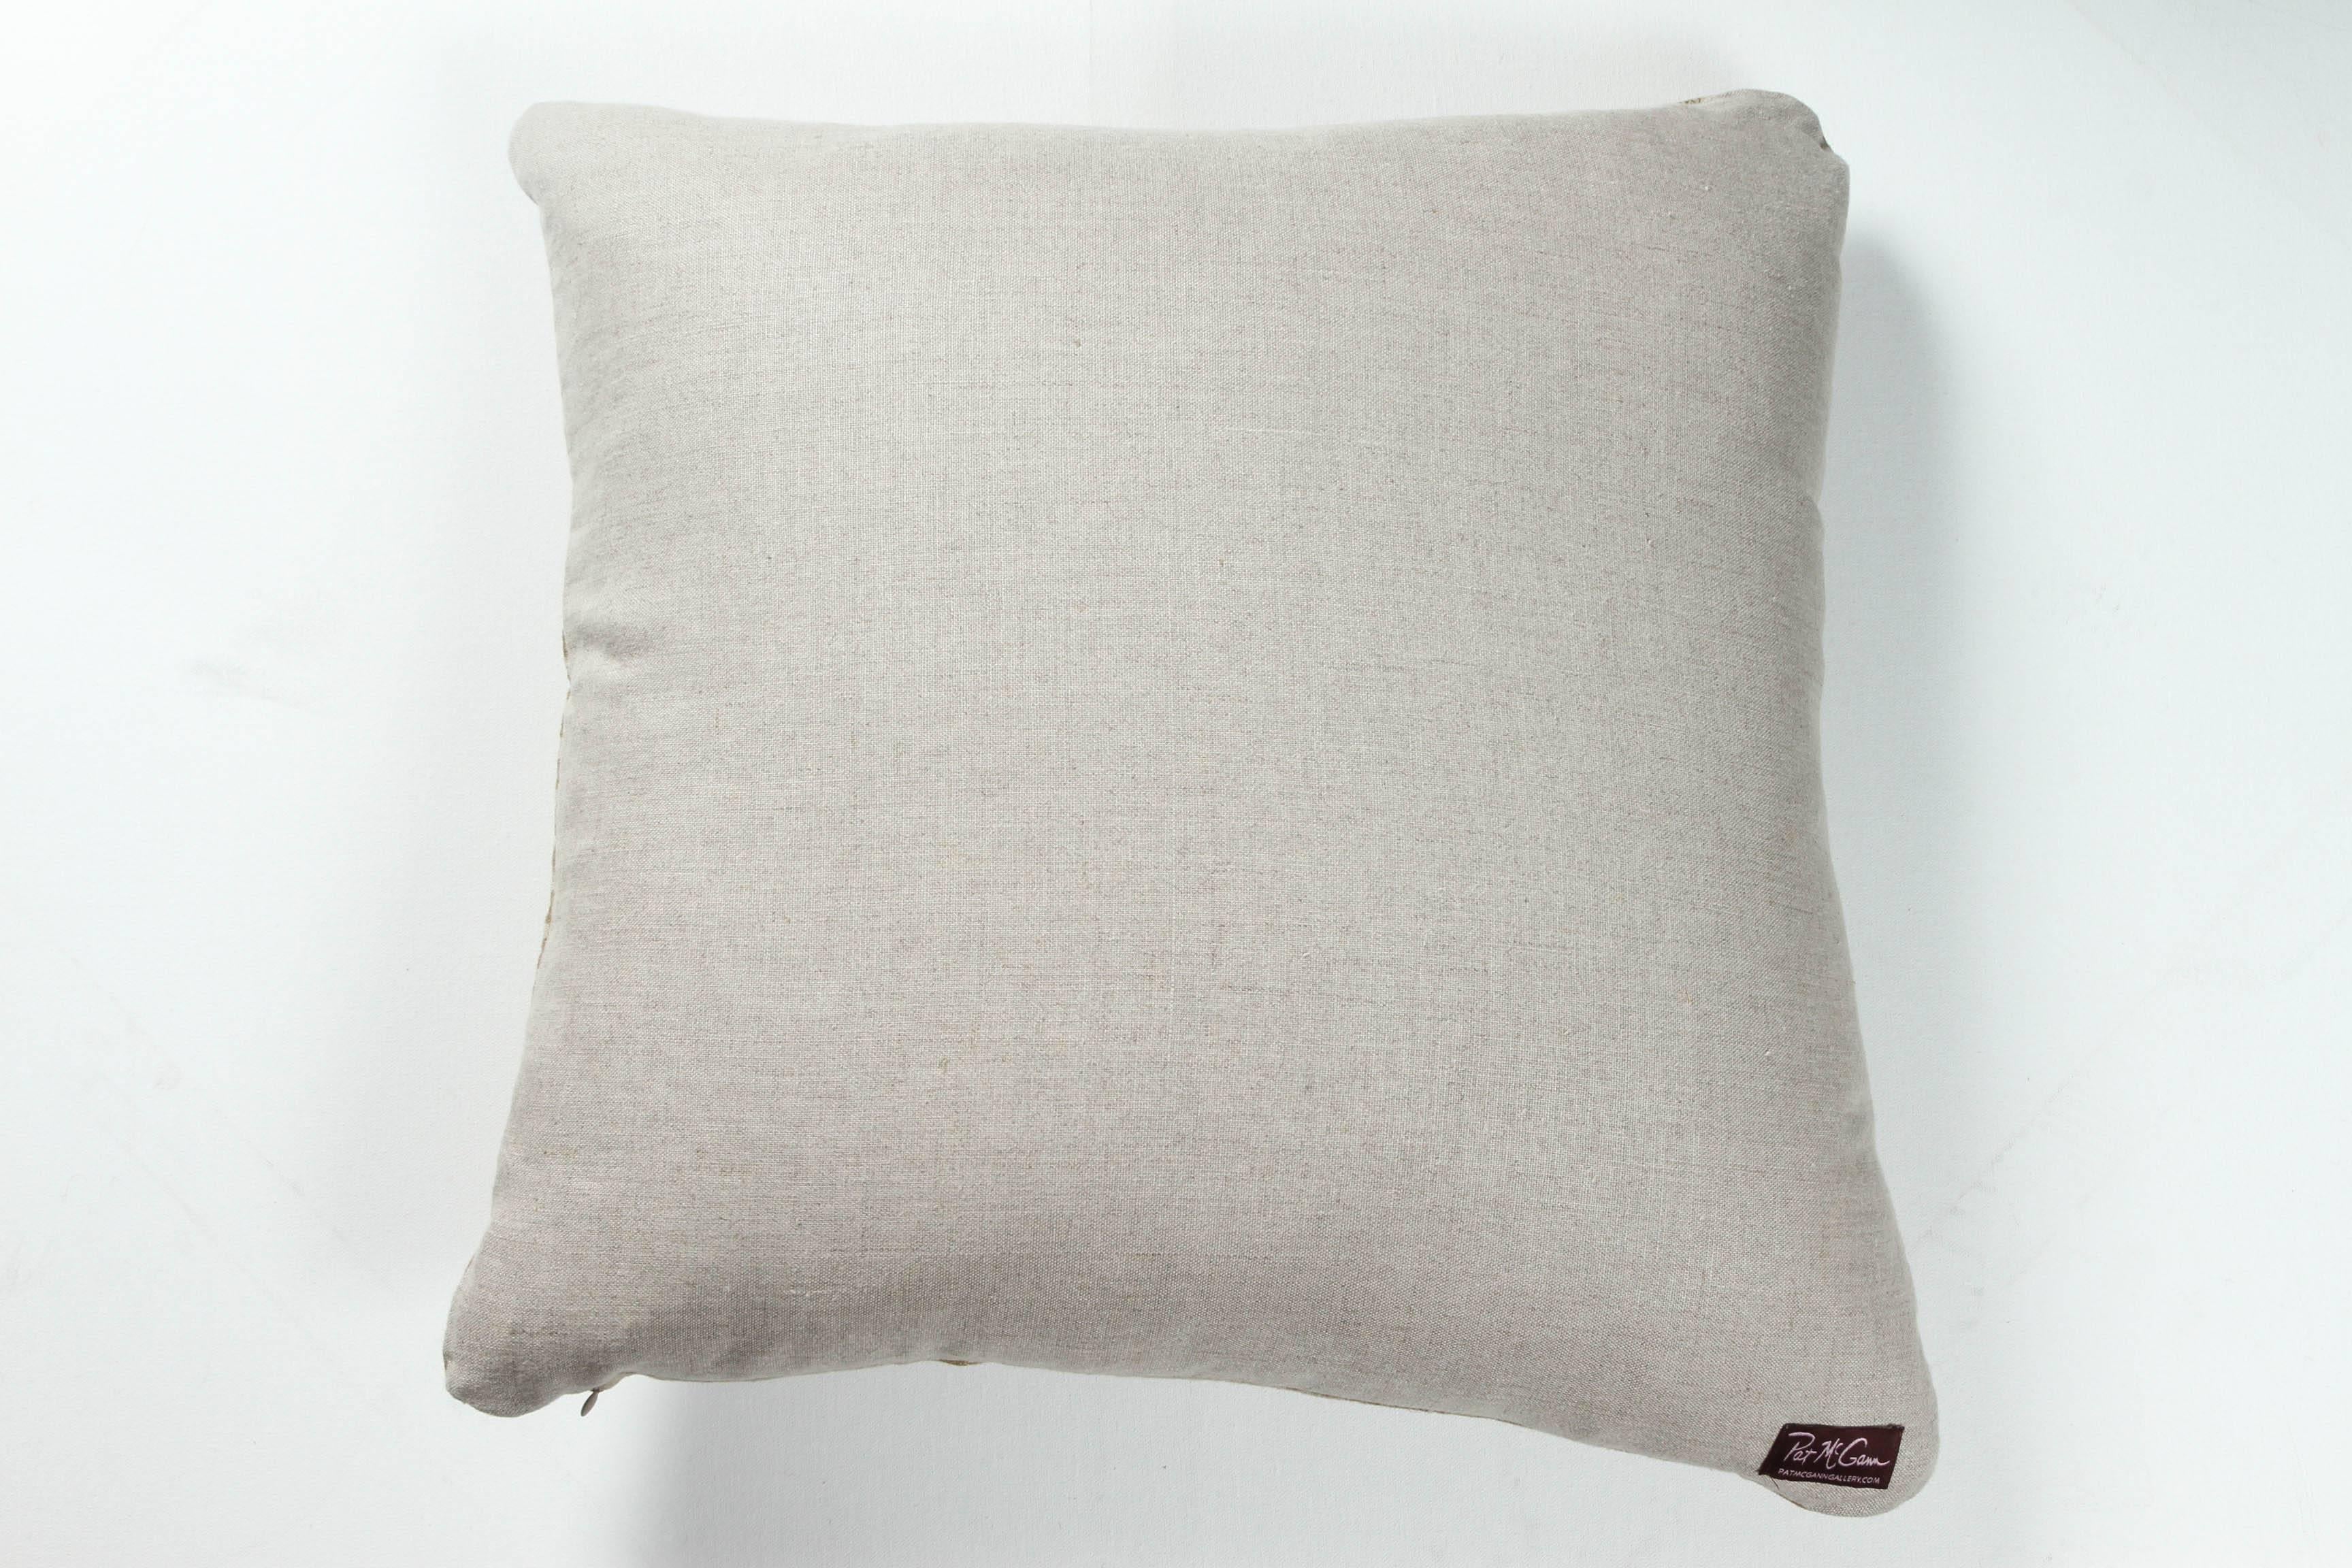 Nigerian African Embroidery Pillow, Ivory and Oatmeal Color